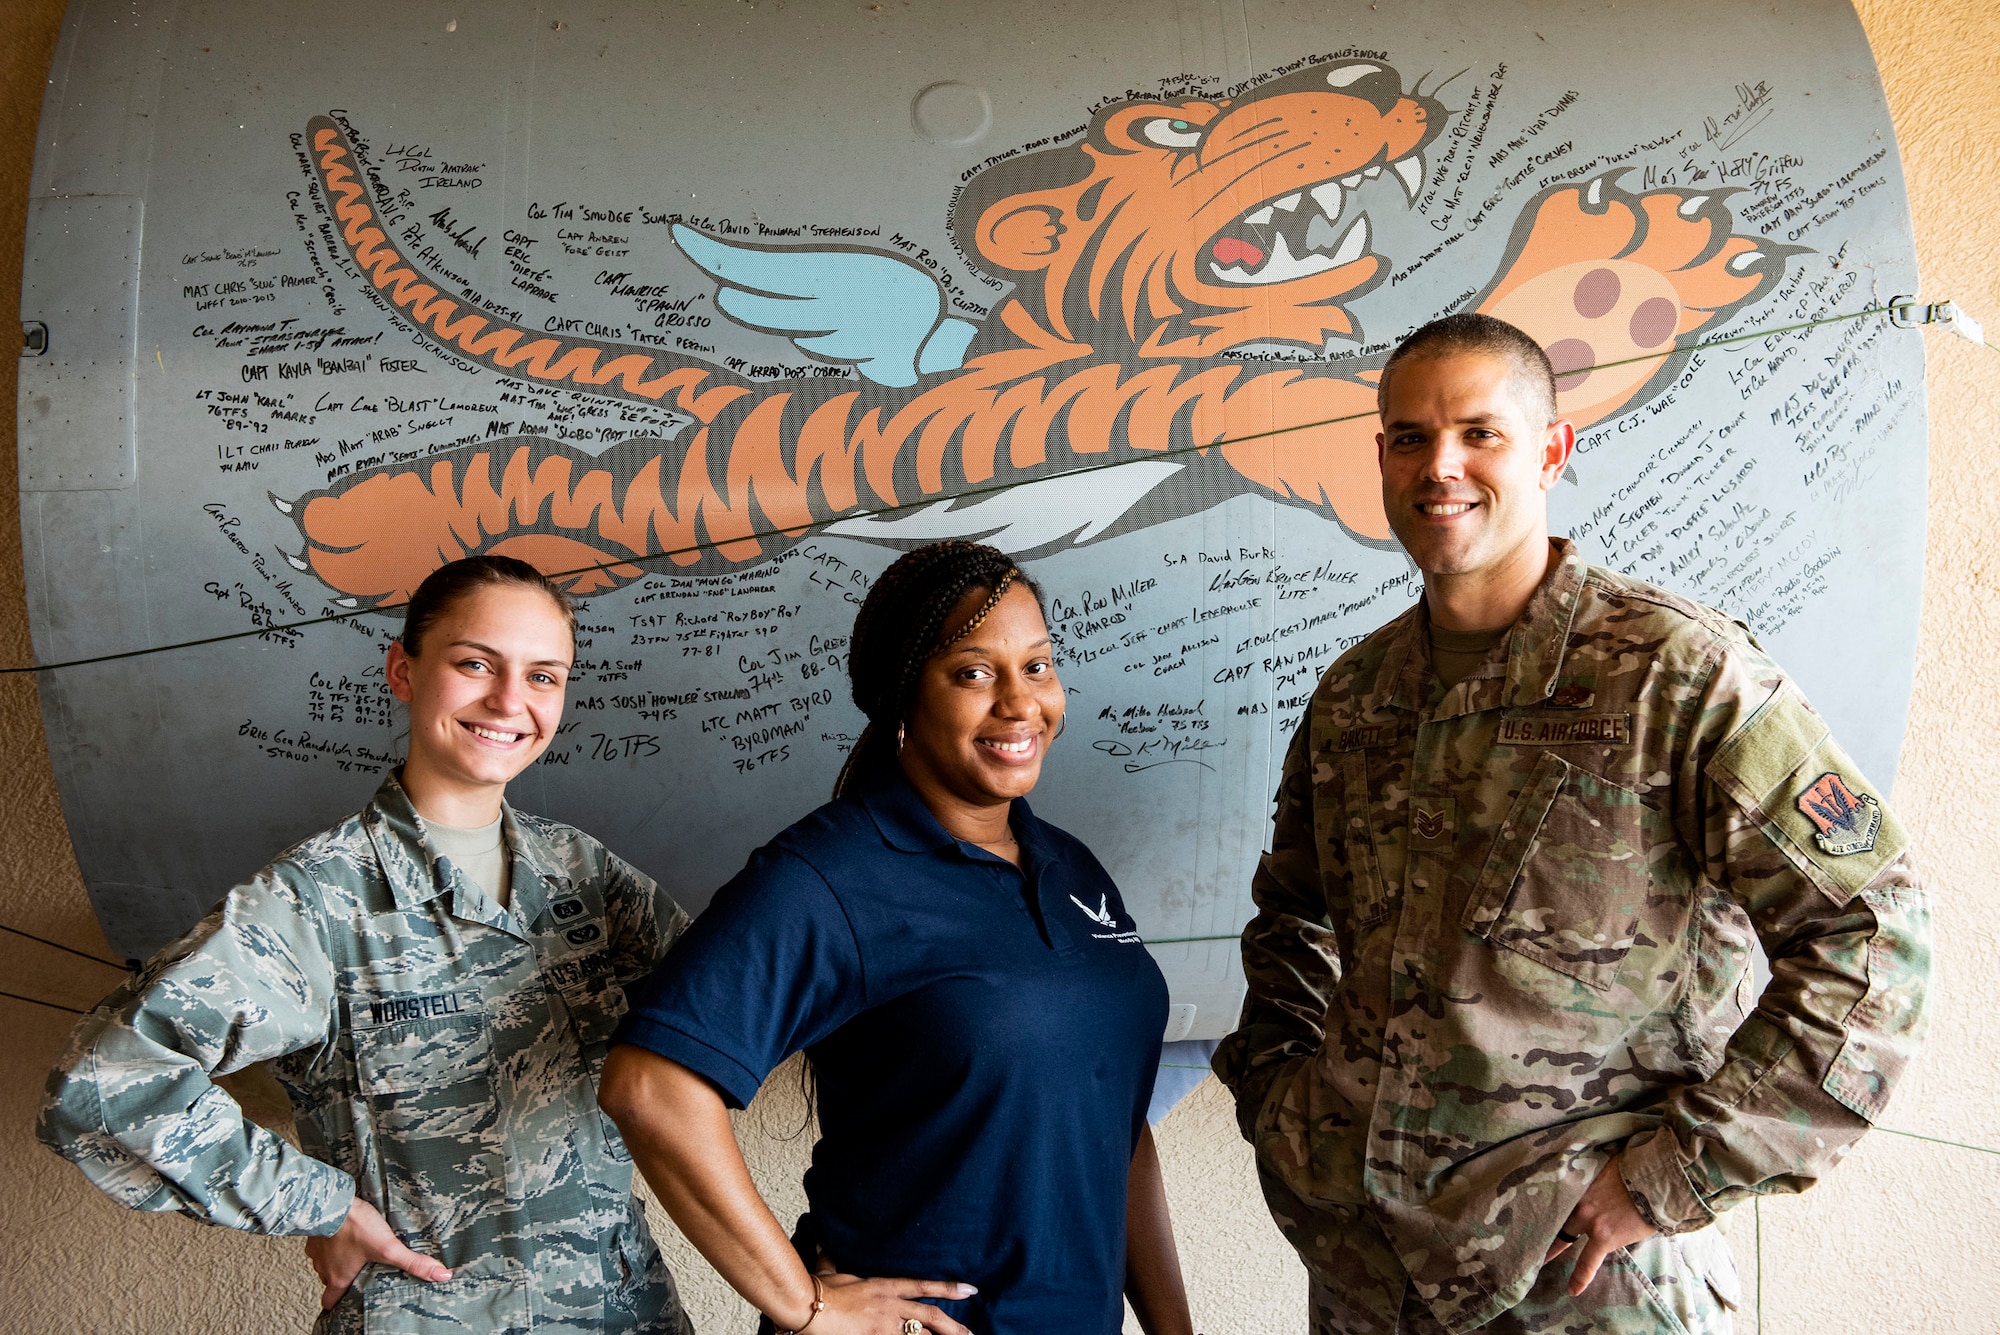 Tech. Sgt. Cole Barkett, right, 23d Maintenance Squadron fuel systems NCO in charge, Tech. Sgt. Turquoise Williams, center, 74th Fighter Squadron flight chief, and Airman Bailey Worstell, 23d Civil Engineer Squadron logistics apprentice, pose for a photo Sept. 10, 2019, at Moody Air Force Base, Ga. All three Airmen shared stories at Moody’s first ever “Owning Your Story” seminar which took place Sept. 12, 2019. During the event, Airmen shared stories of resiliency and how they overcame their adversity in a positive way. (U.S. Air Force photo by Senior Airman Erick Requadt)